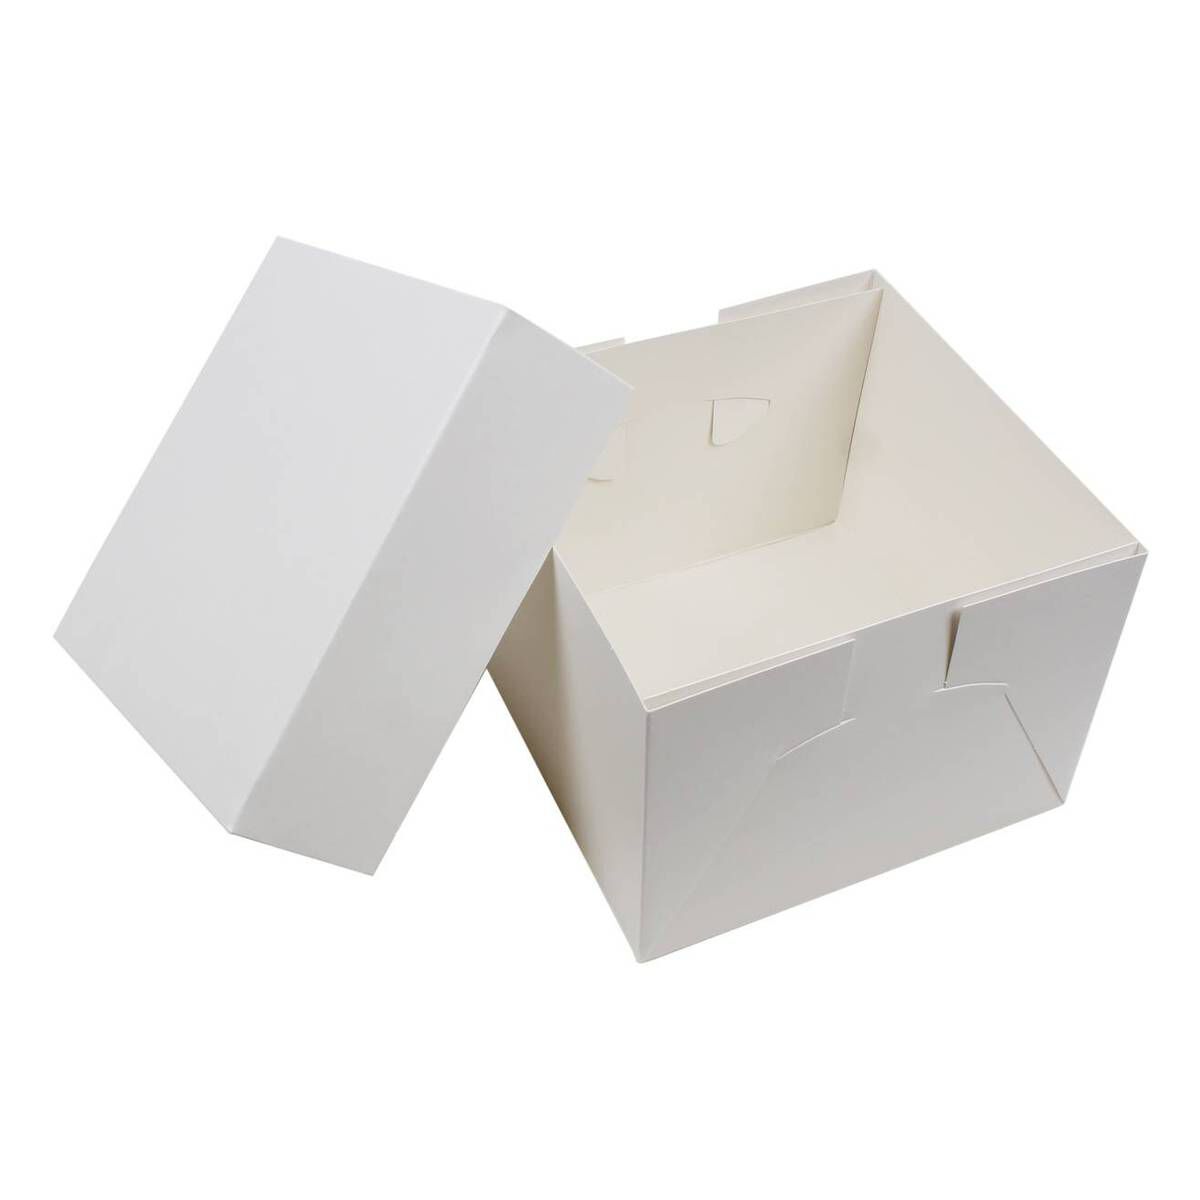 330mm × 330mm + 100mm | White Cardboard Cake Boxes - Wholesale and Retail |  Suppliers of Paper and Plastic Food Service Baking Party Products | Online  Sydney NSW Australia